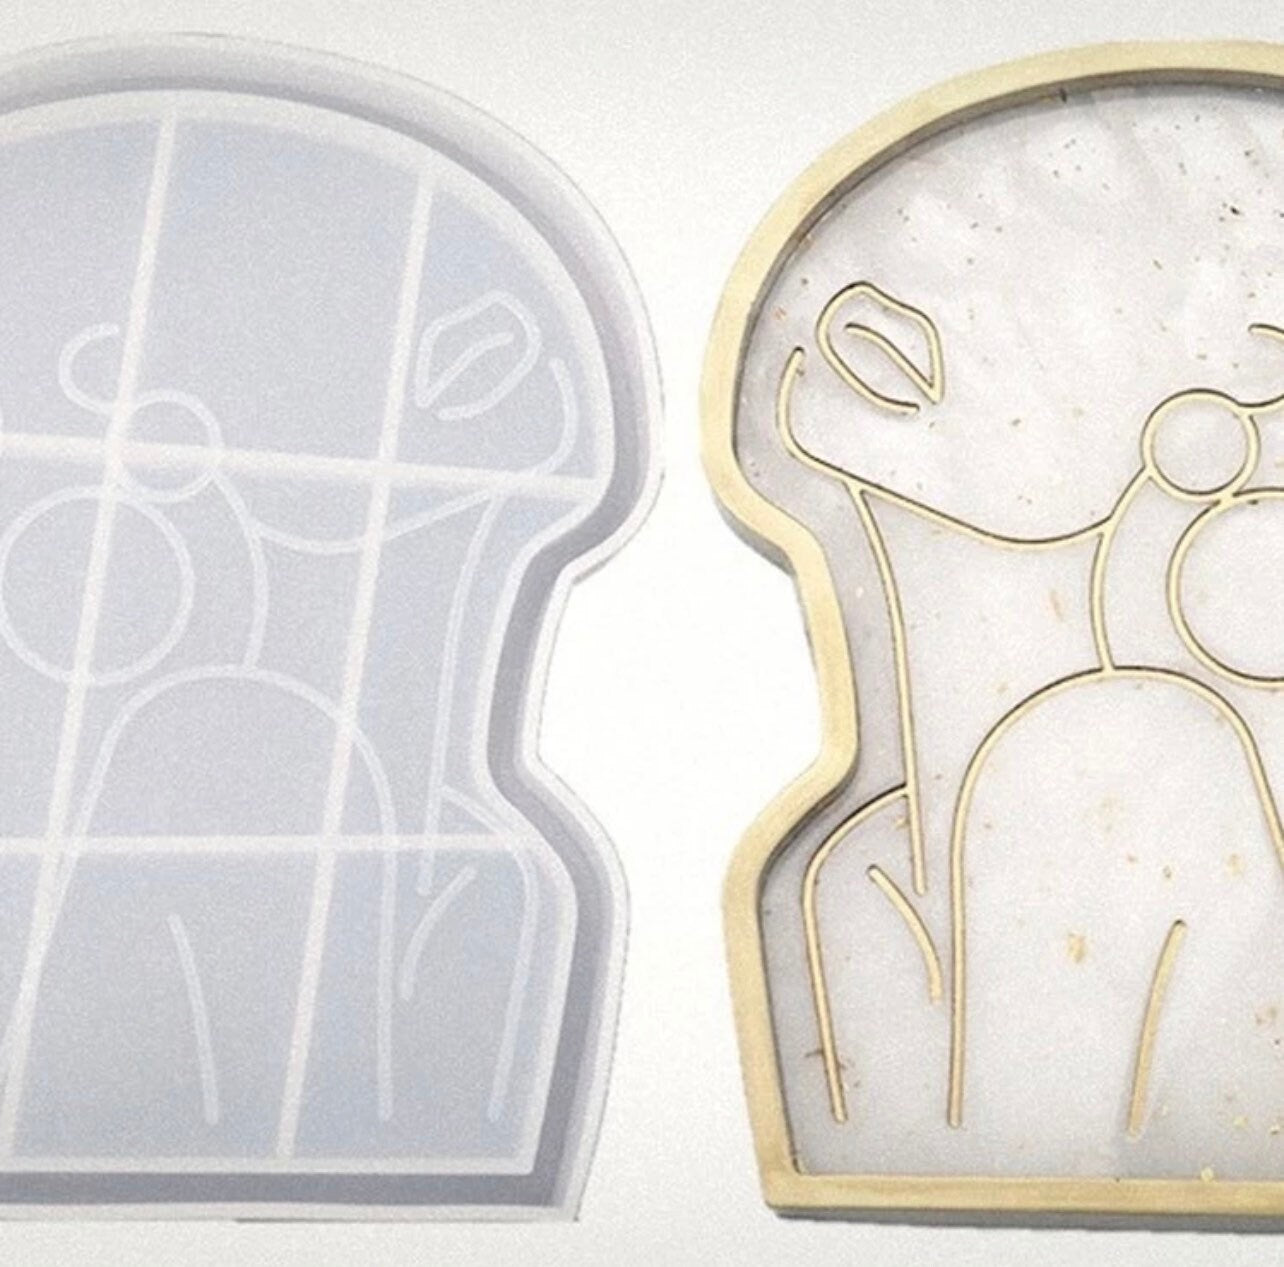 Lady Silhouette Coaster Mold